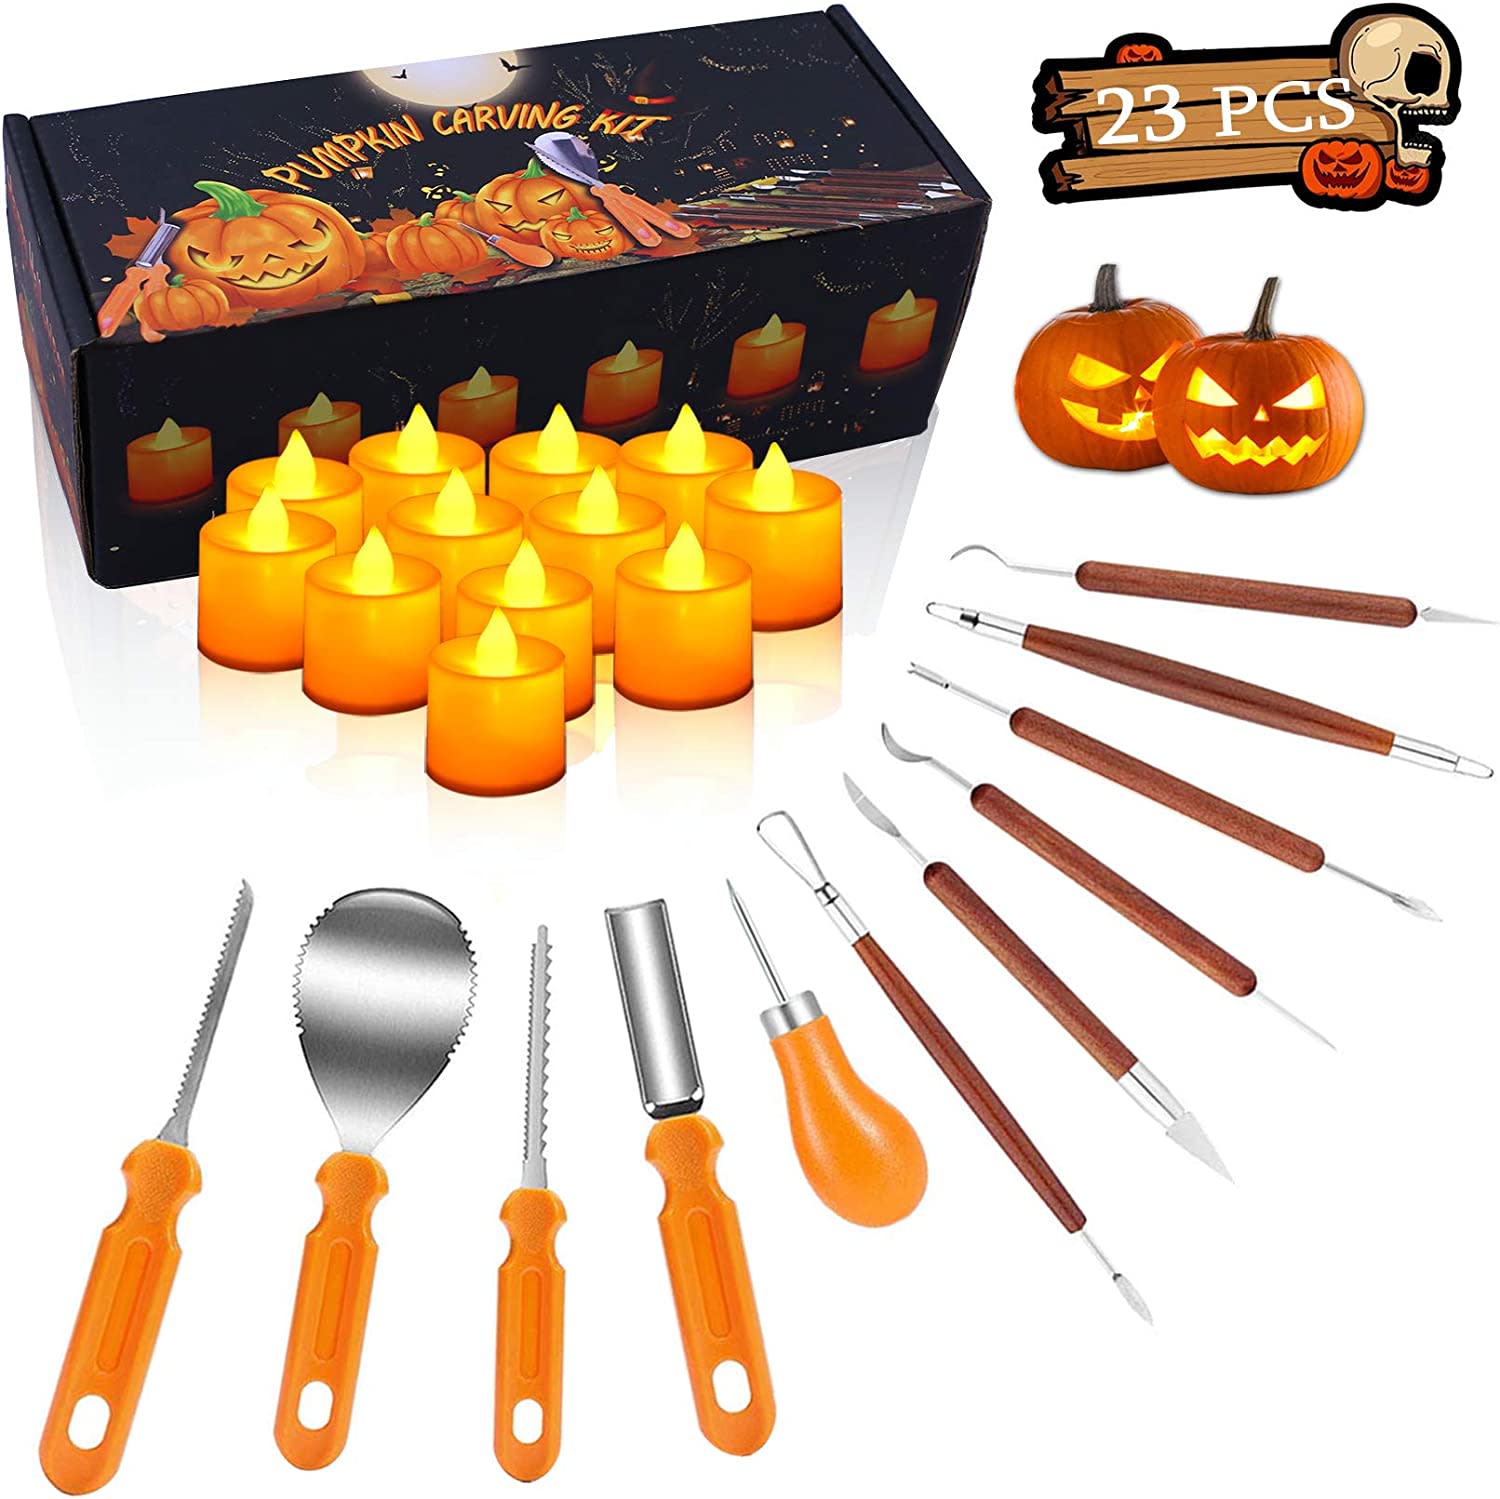 https://cdn.apartmenttherapy.info/image/upload/v1665963623/gen-workflow/product-database/pumpkin-carving-kit-with-lights-amazon.jpg